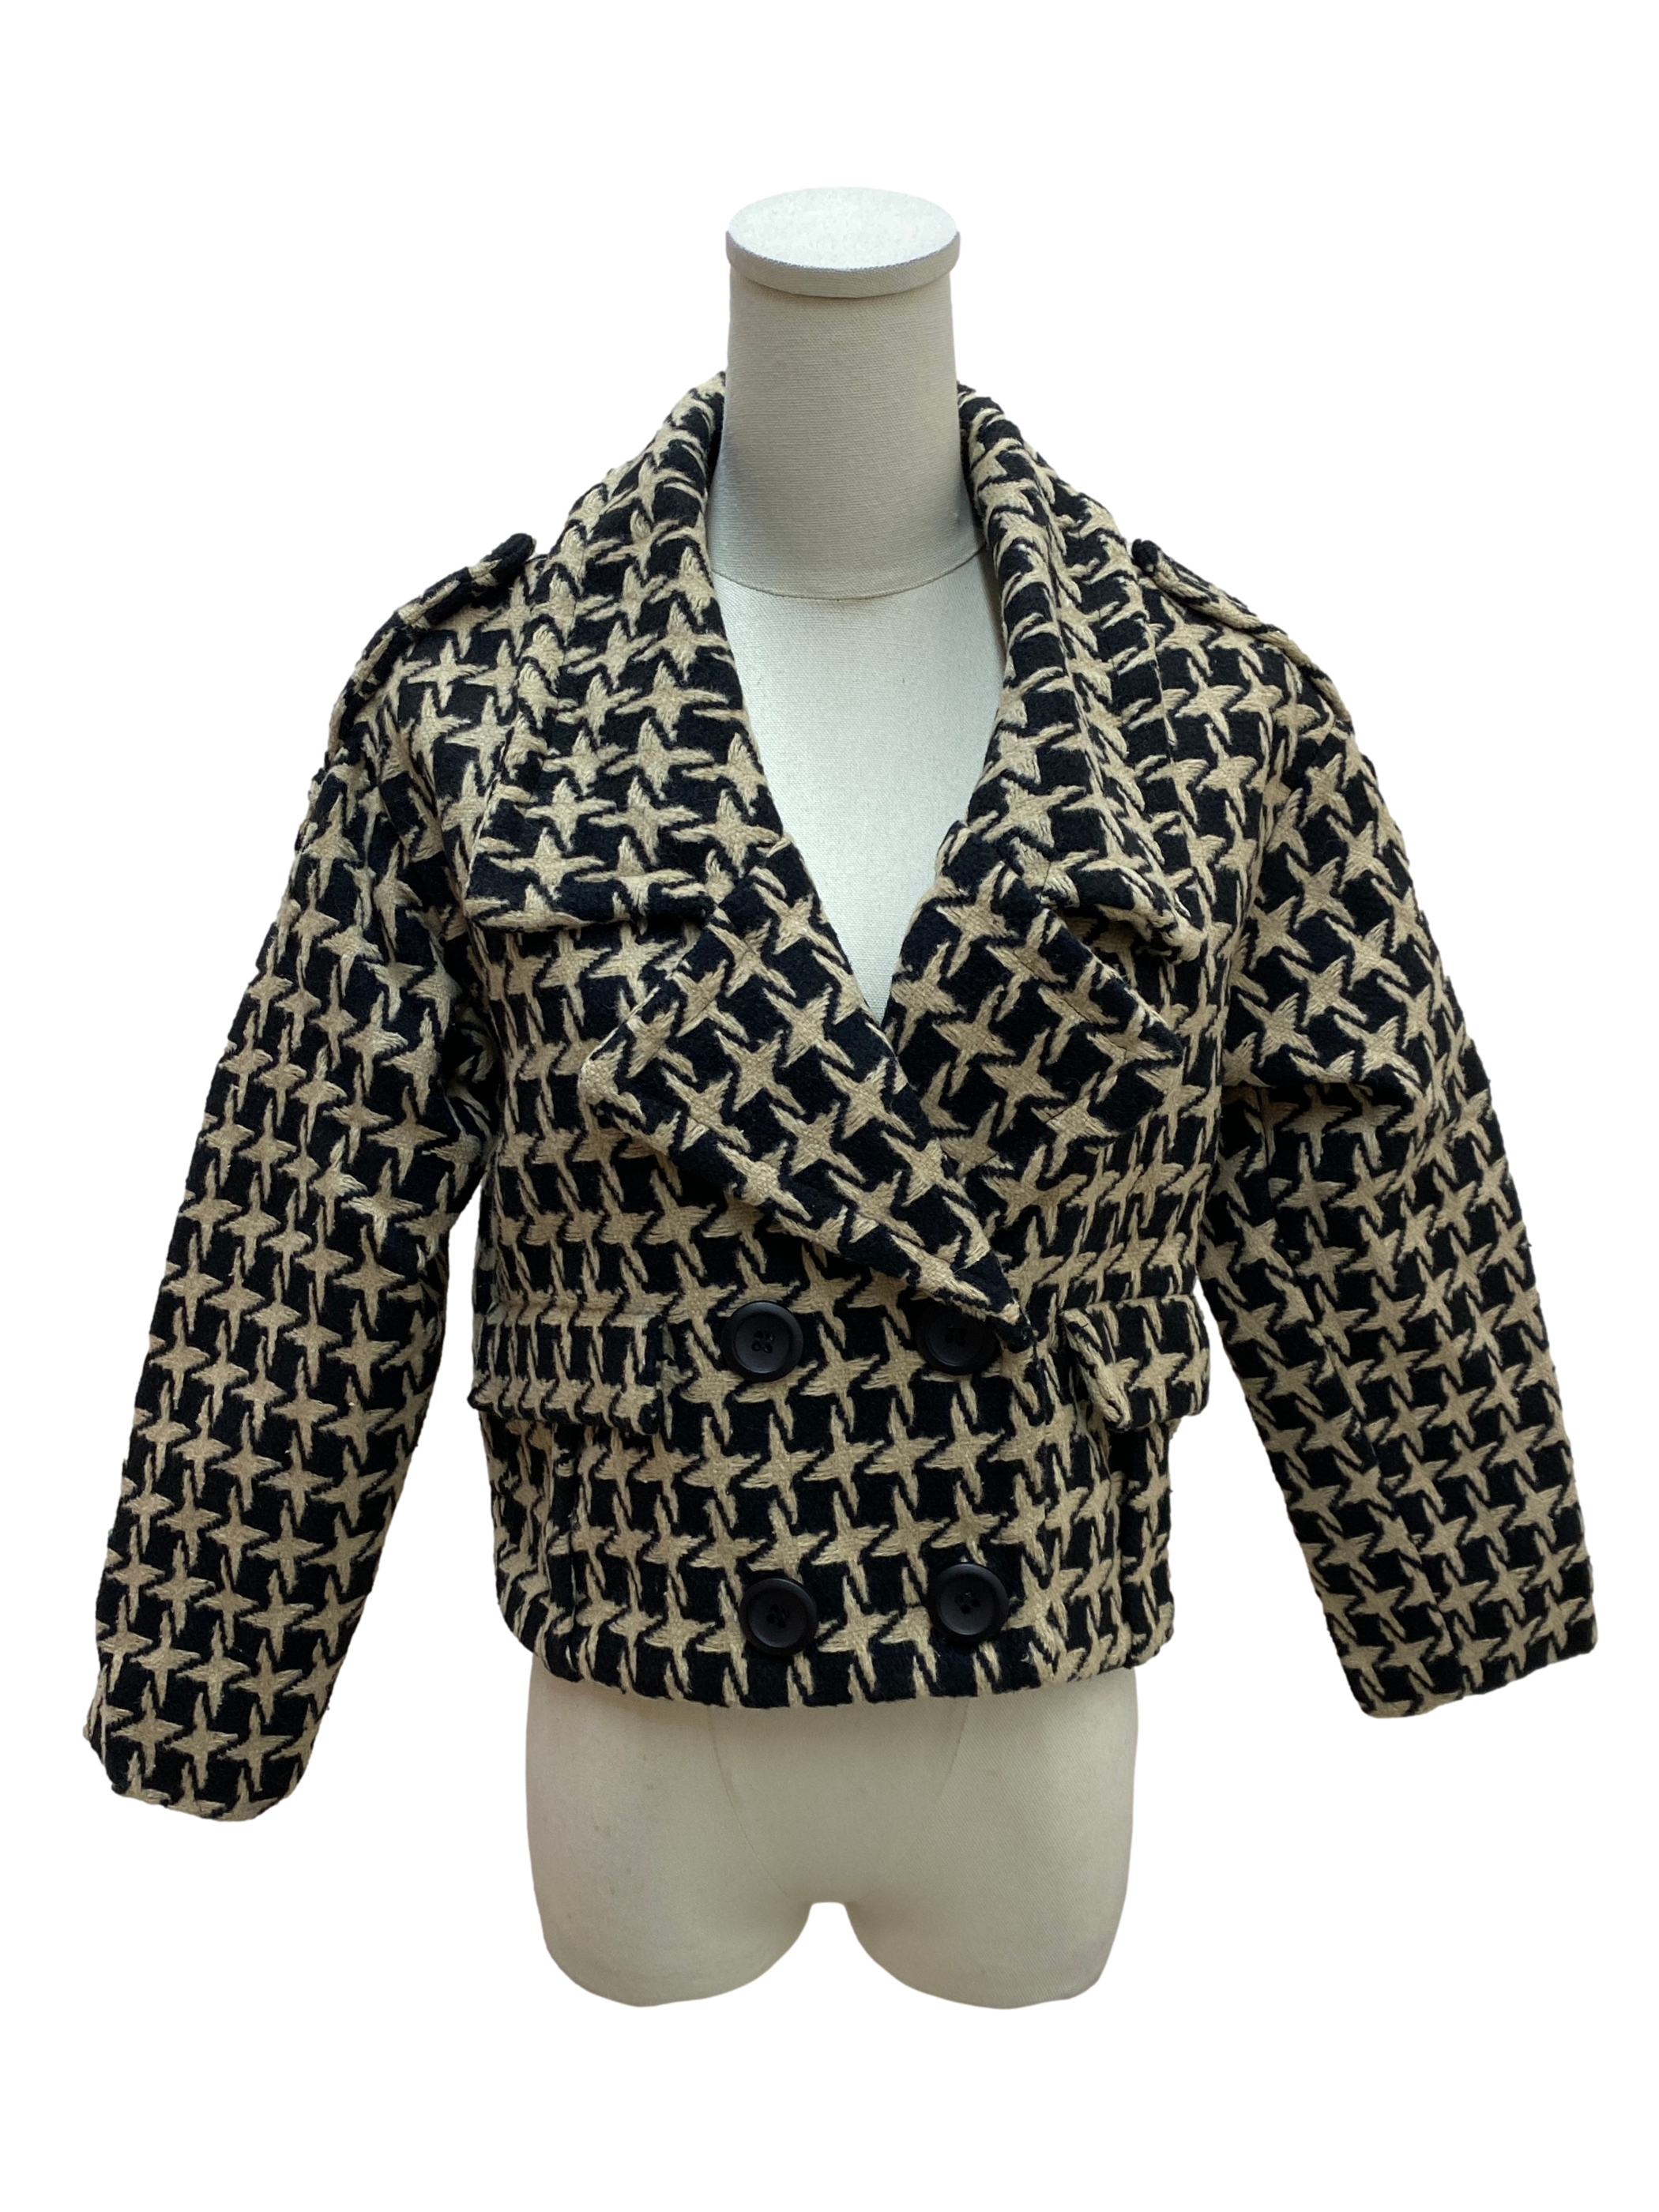 Tortilla Brown and Black Houndstooth Jacket